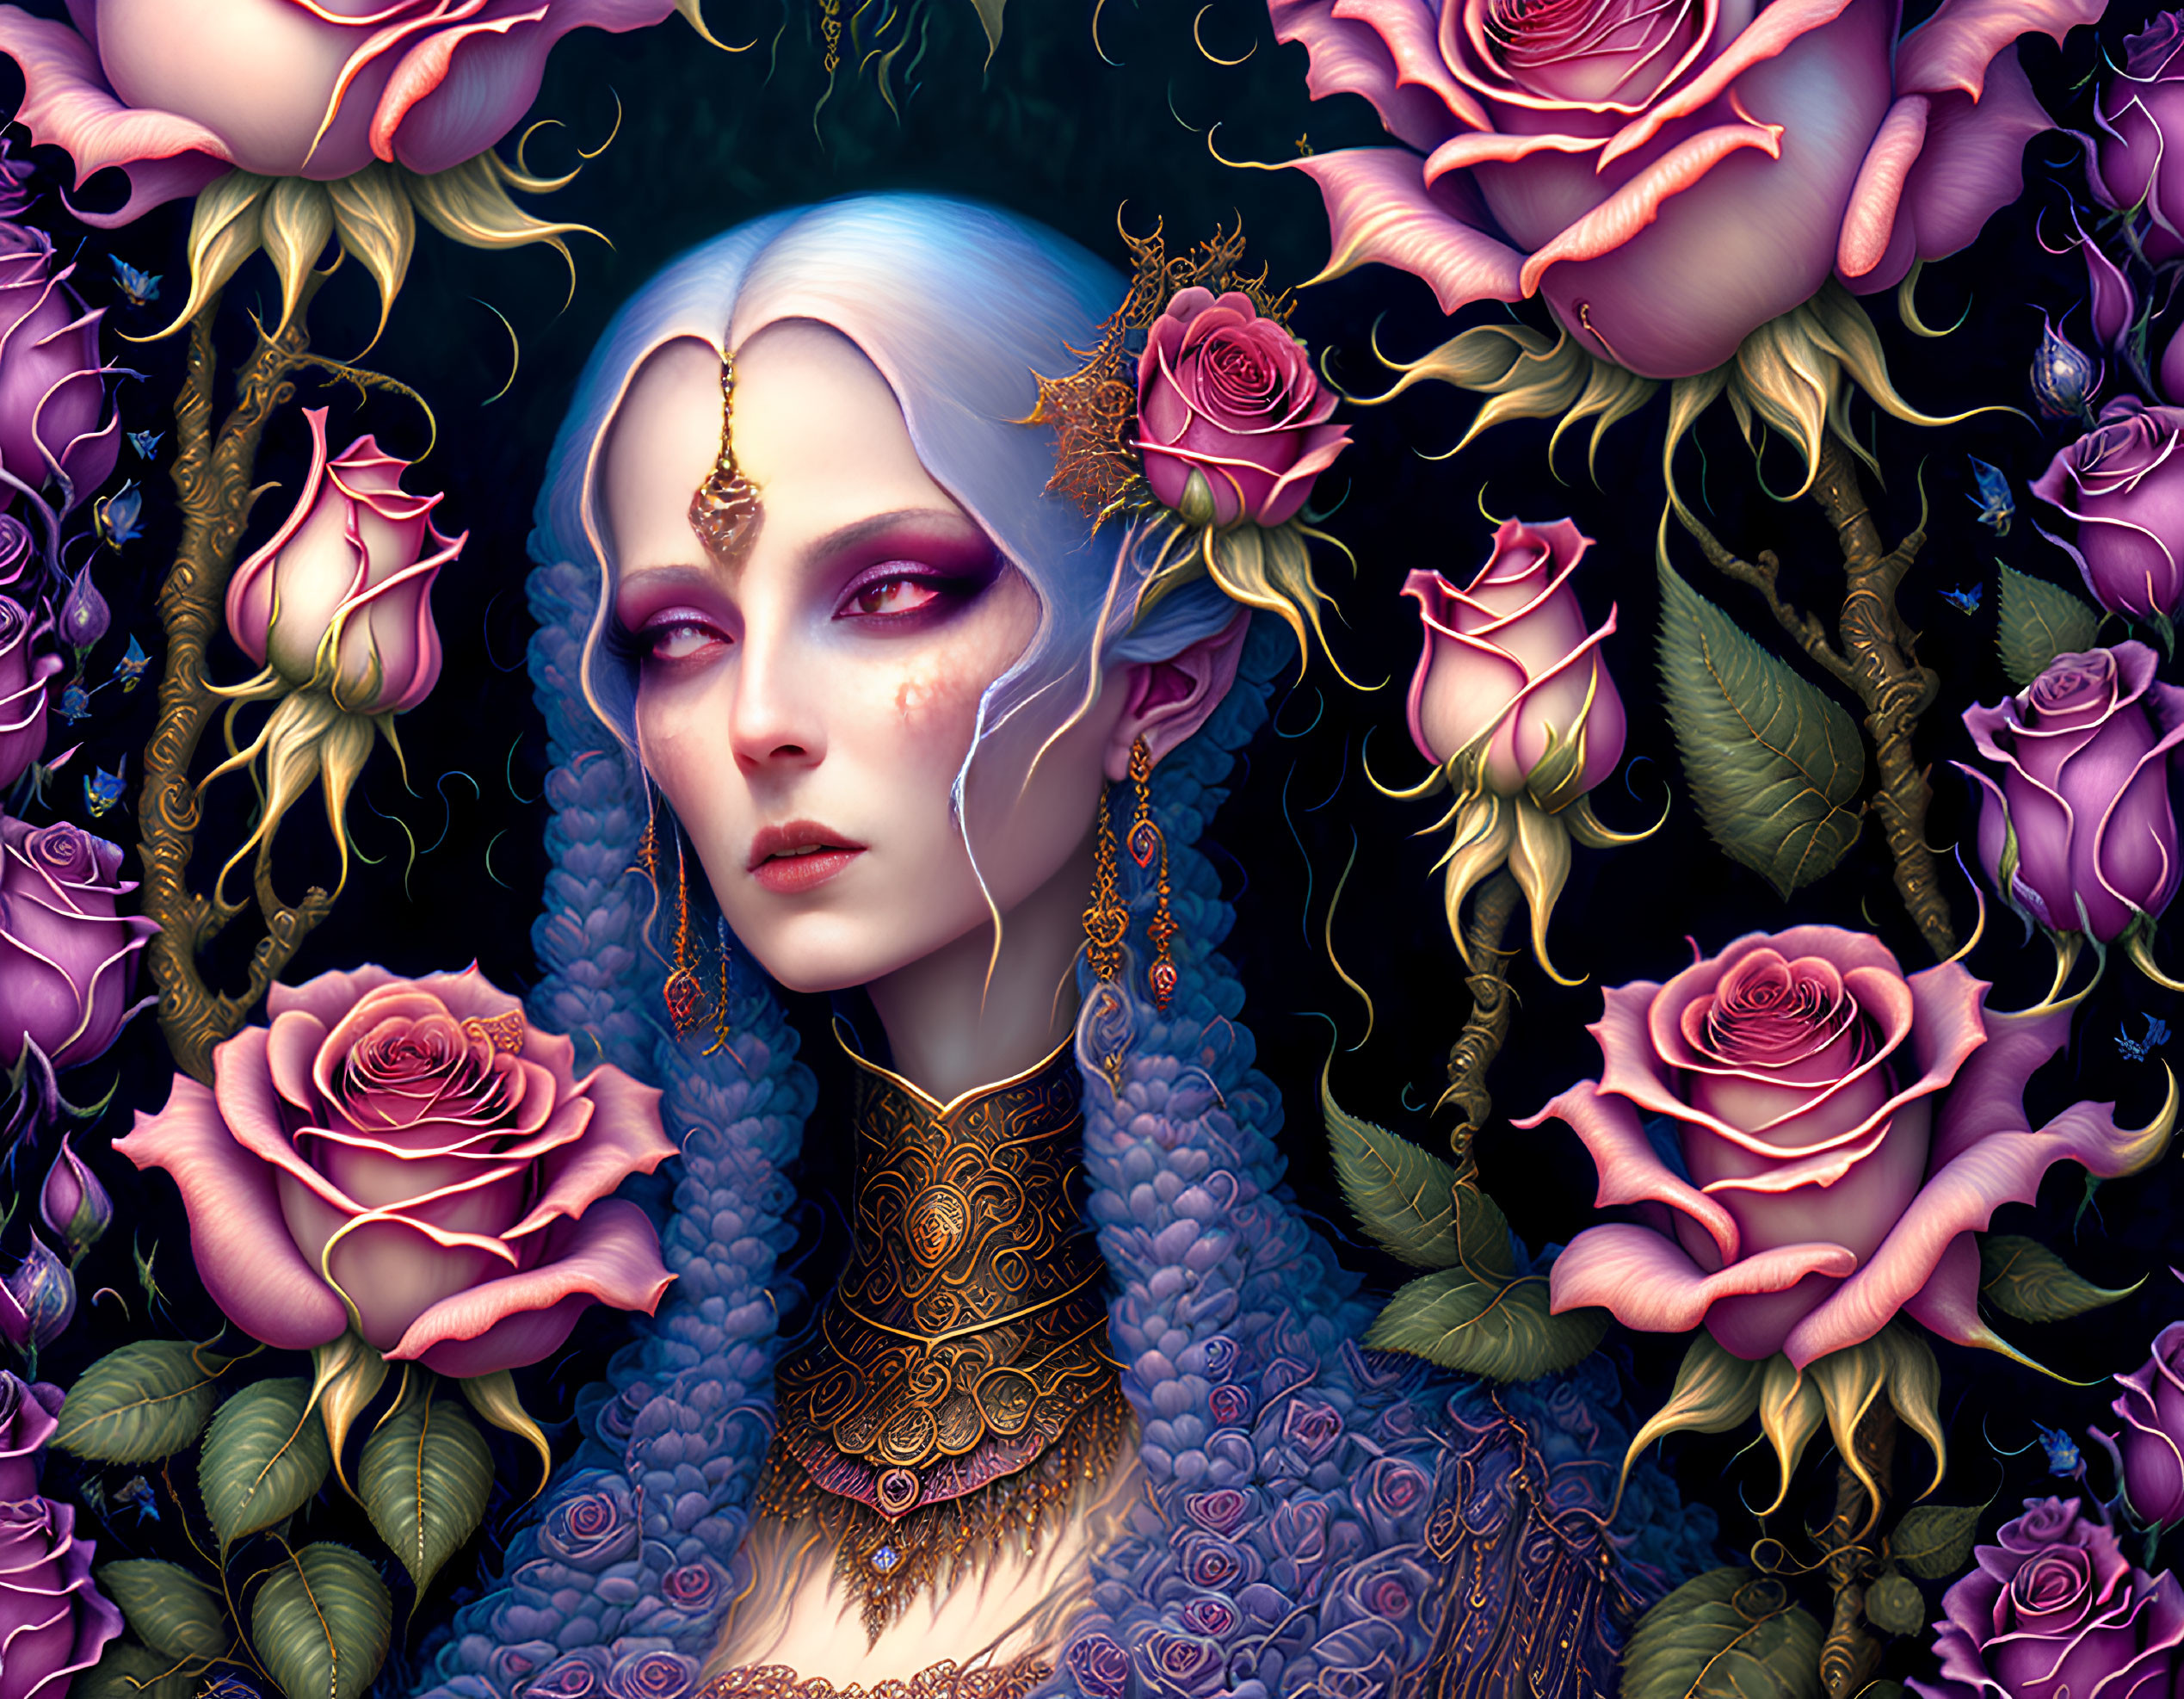 Fantasy digital artwork of pale woman with white hair and golden jewelry surrounded by purple roses